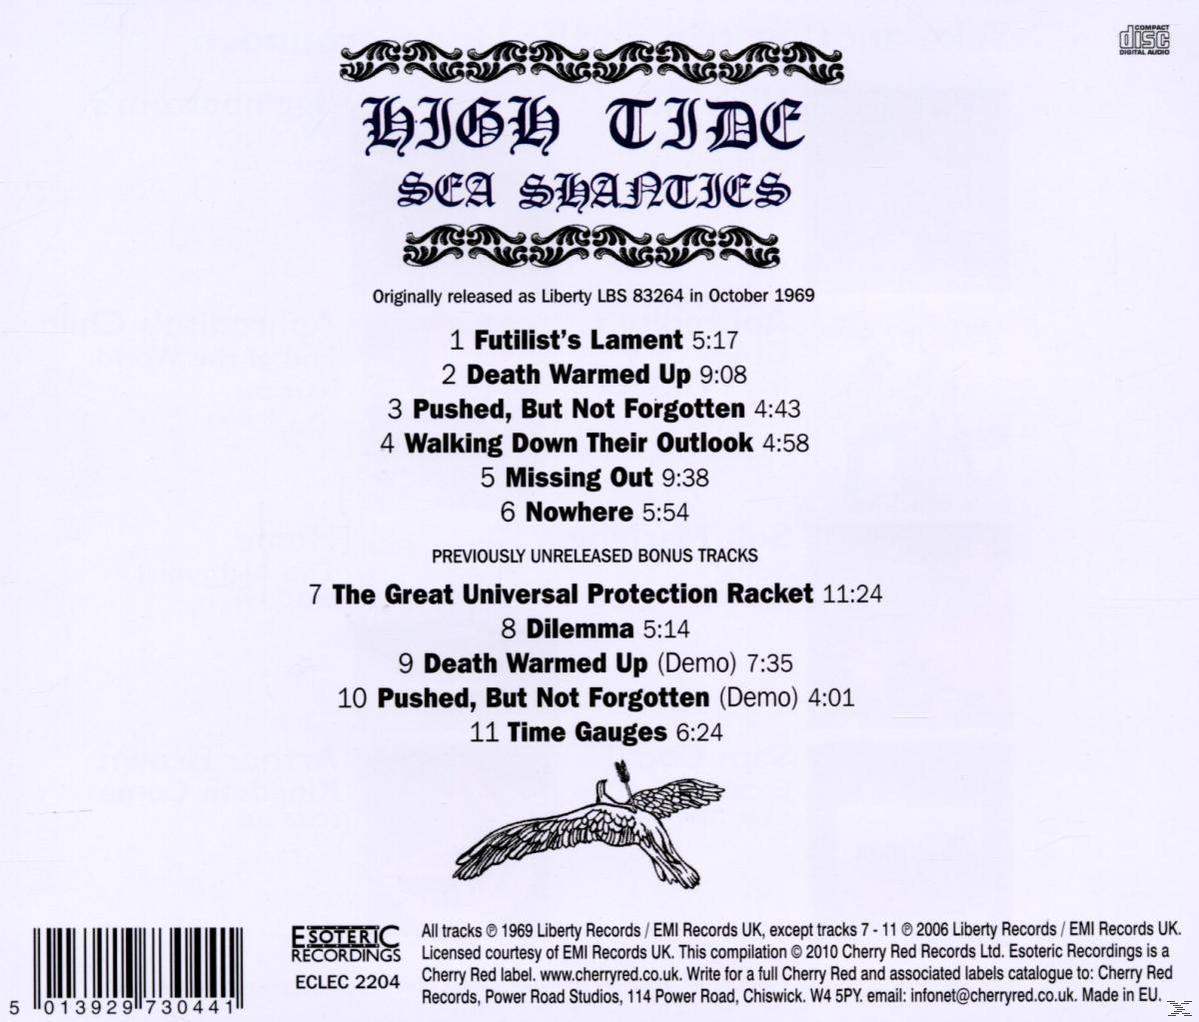 High Tide - Sea Shanties (Expanded+Remastered) (CD) 